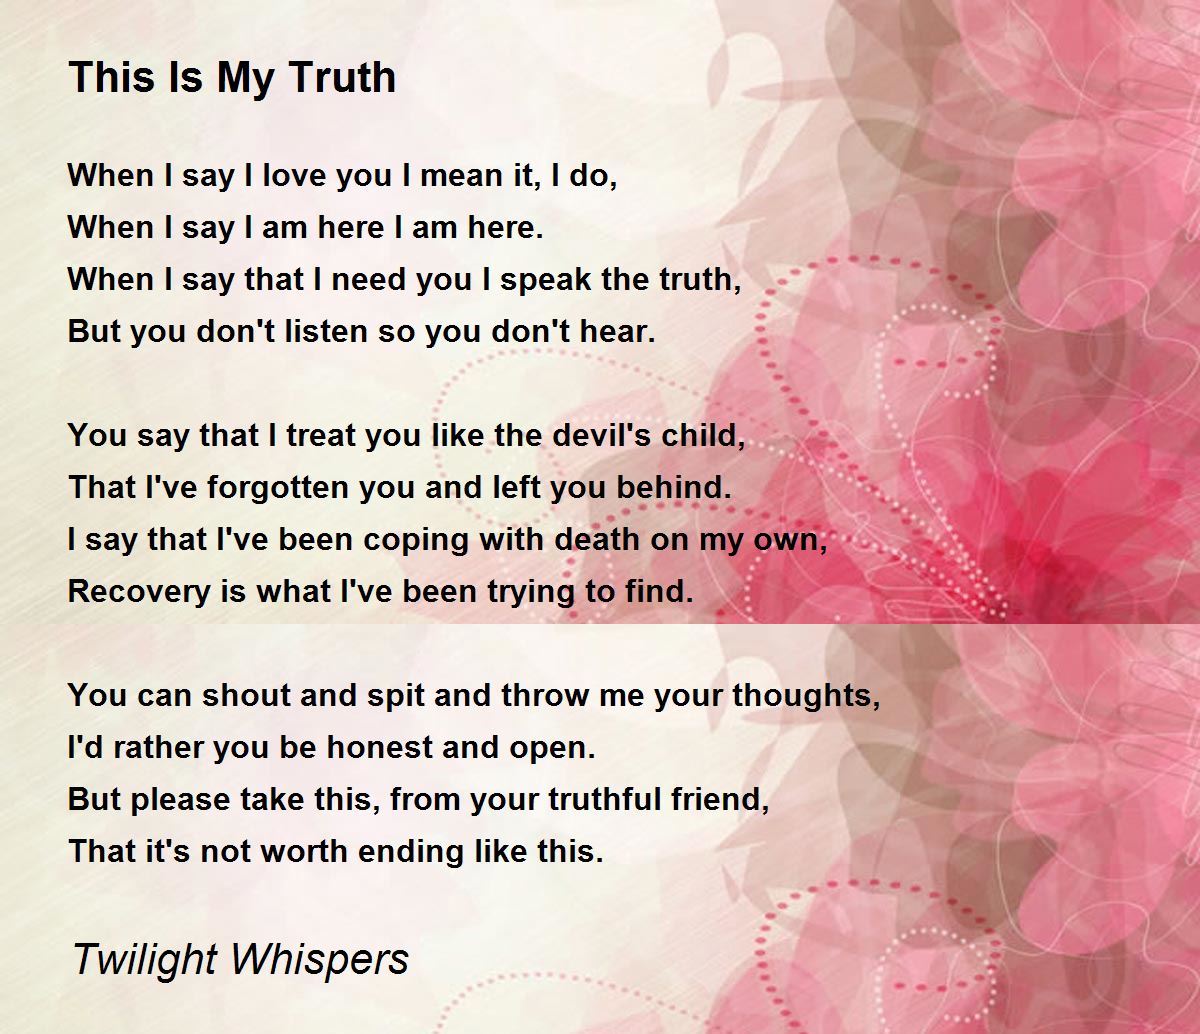 This Is My Truth - This Is My Truth Poem by Twilight Whispers